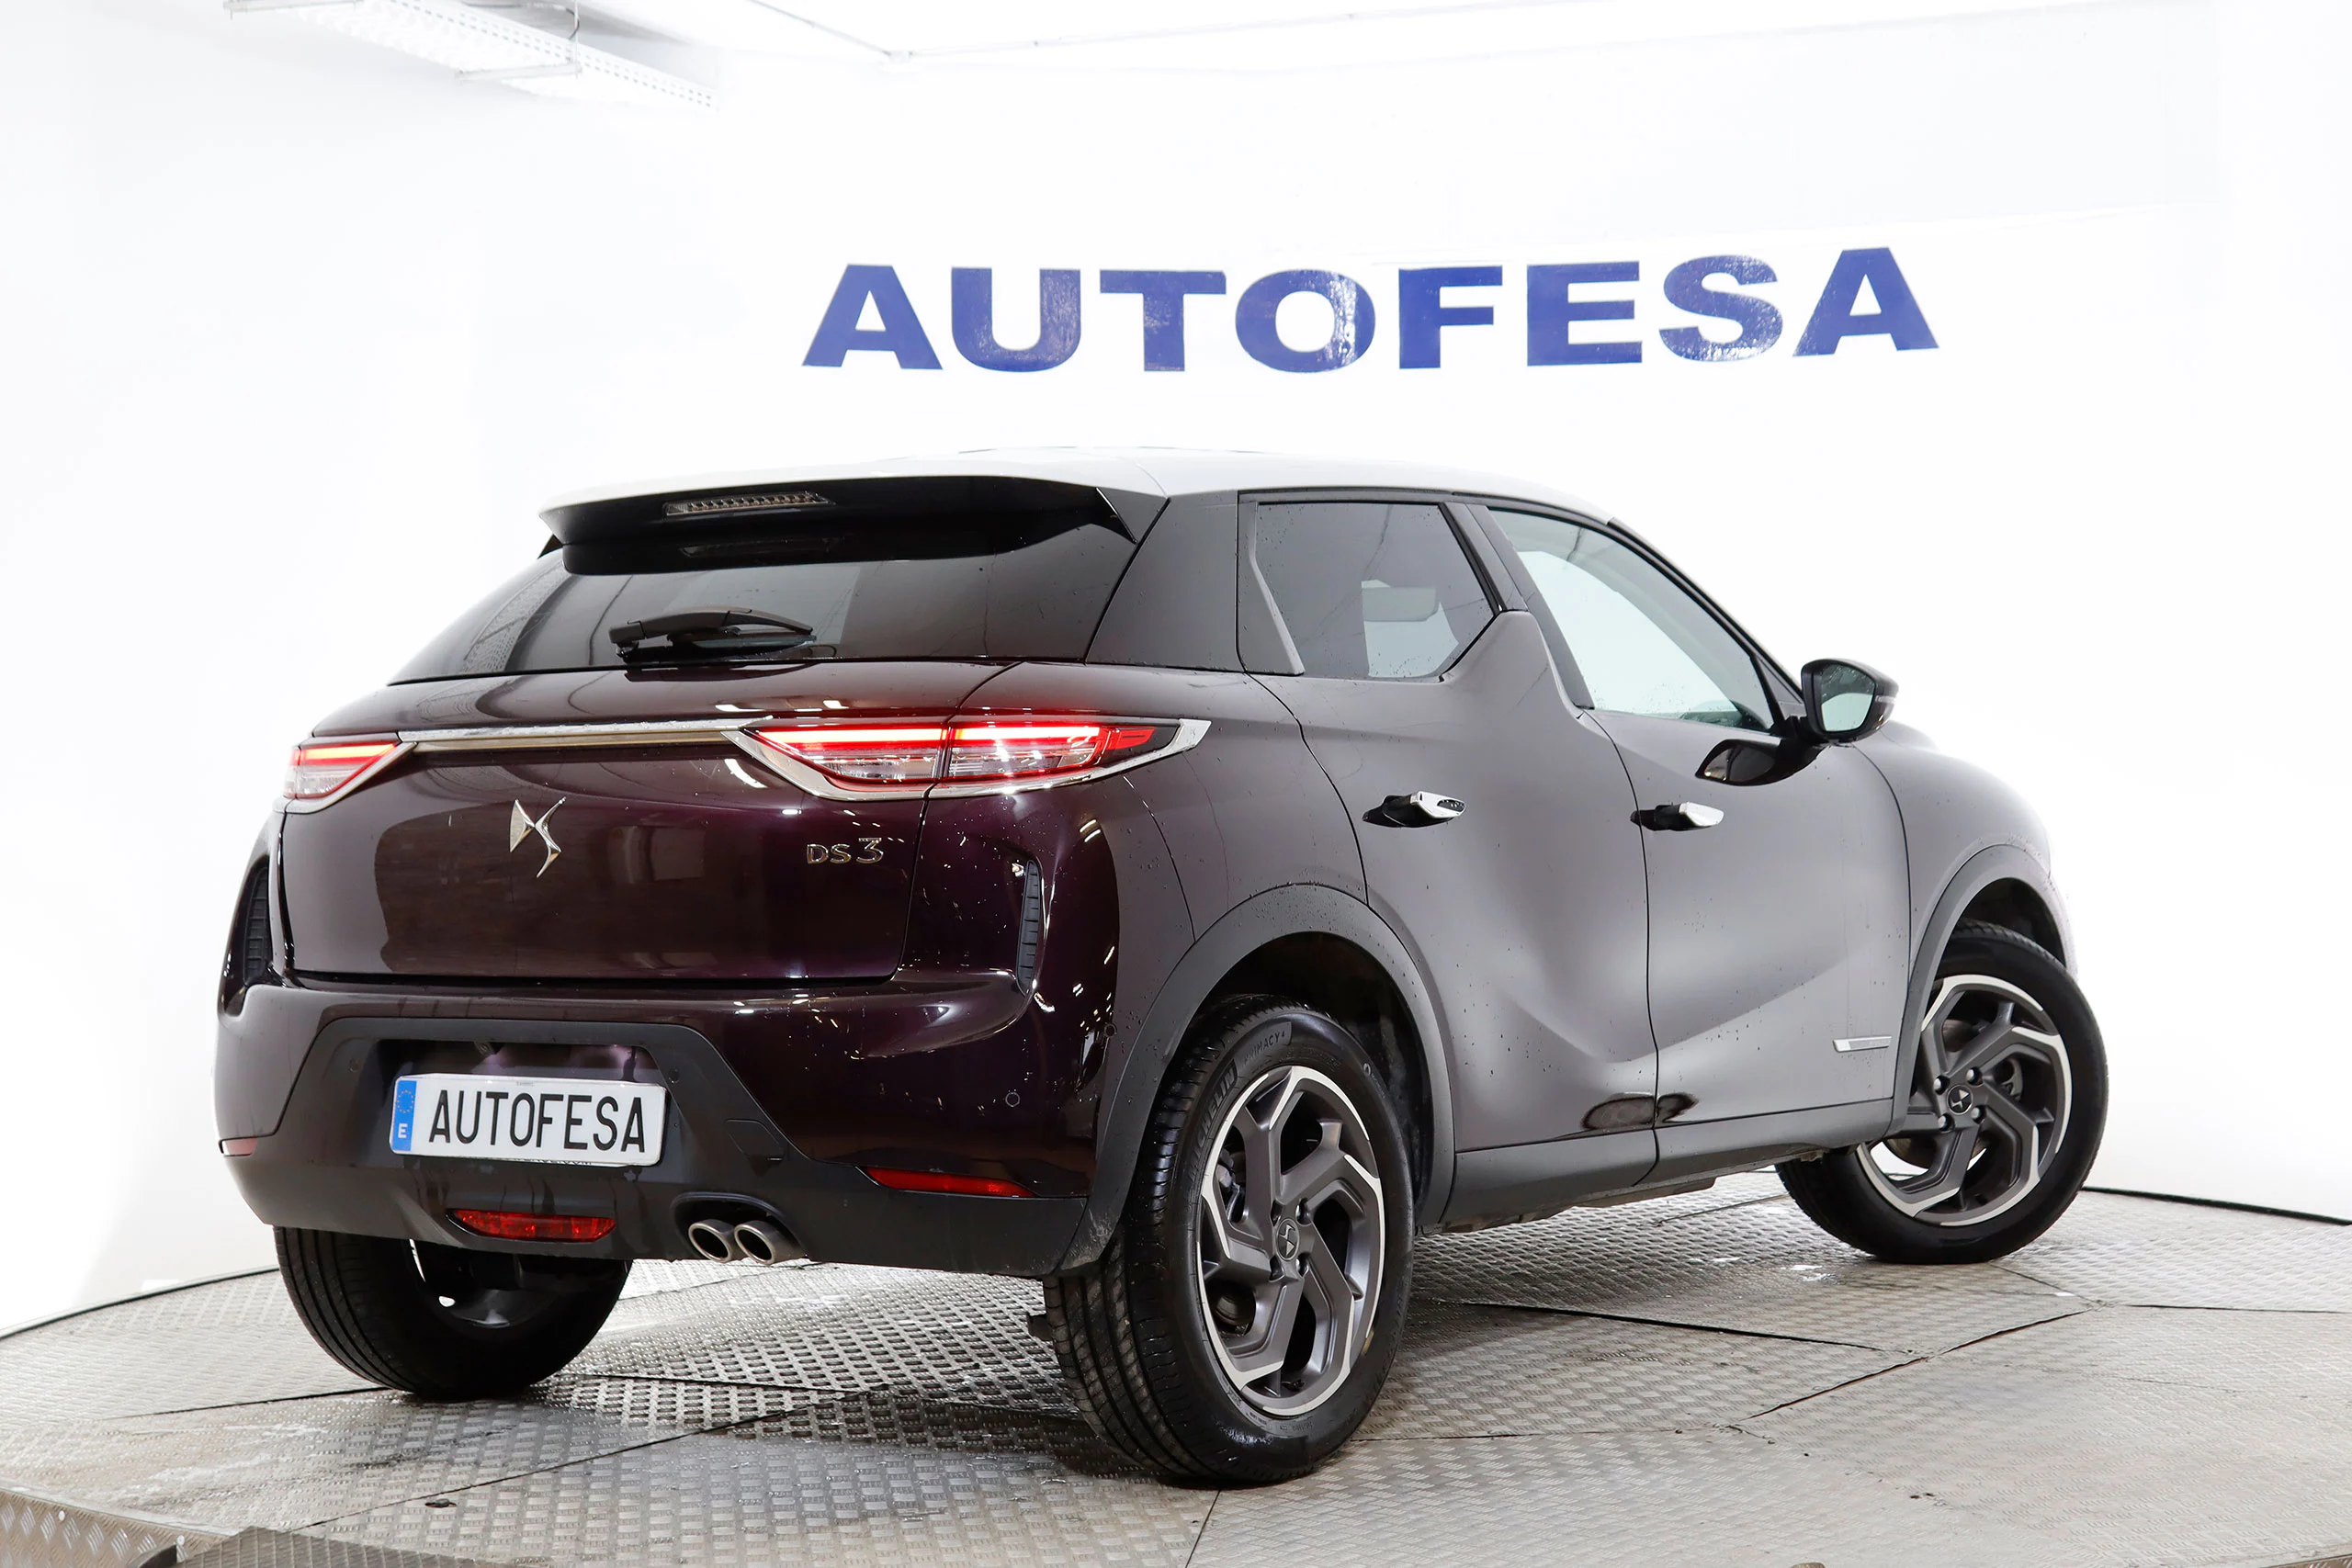 DS DS 3 Crossback 1.2 Grand Chic 130cv Auto 5P S/S # NAVY, FAROS LED - Foto 6